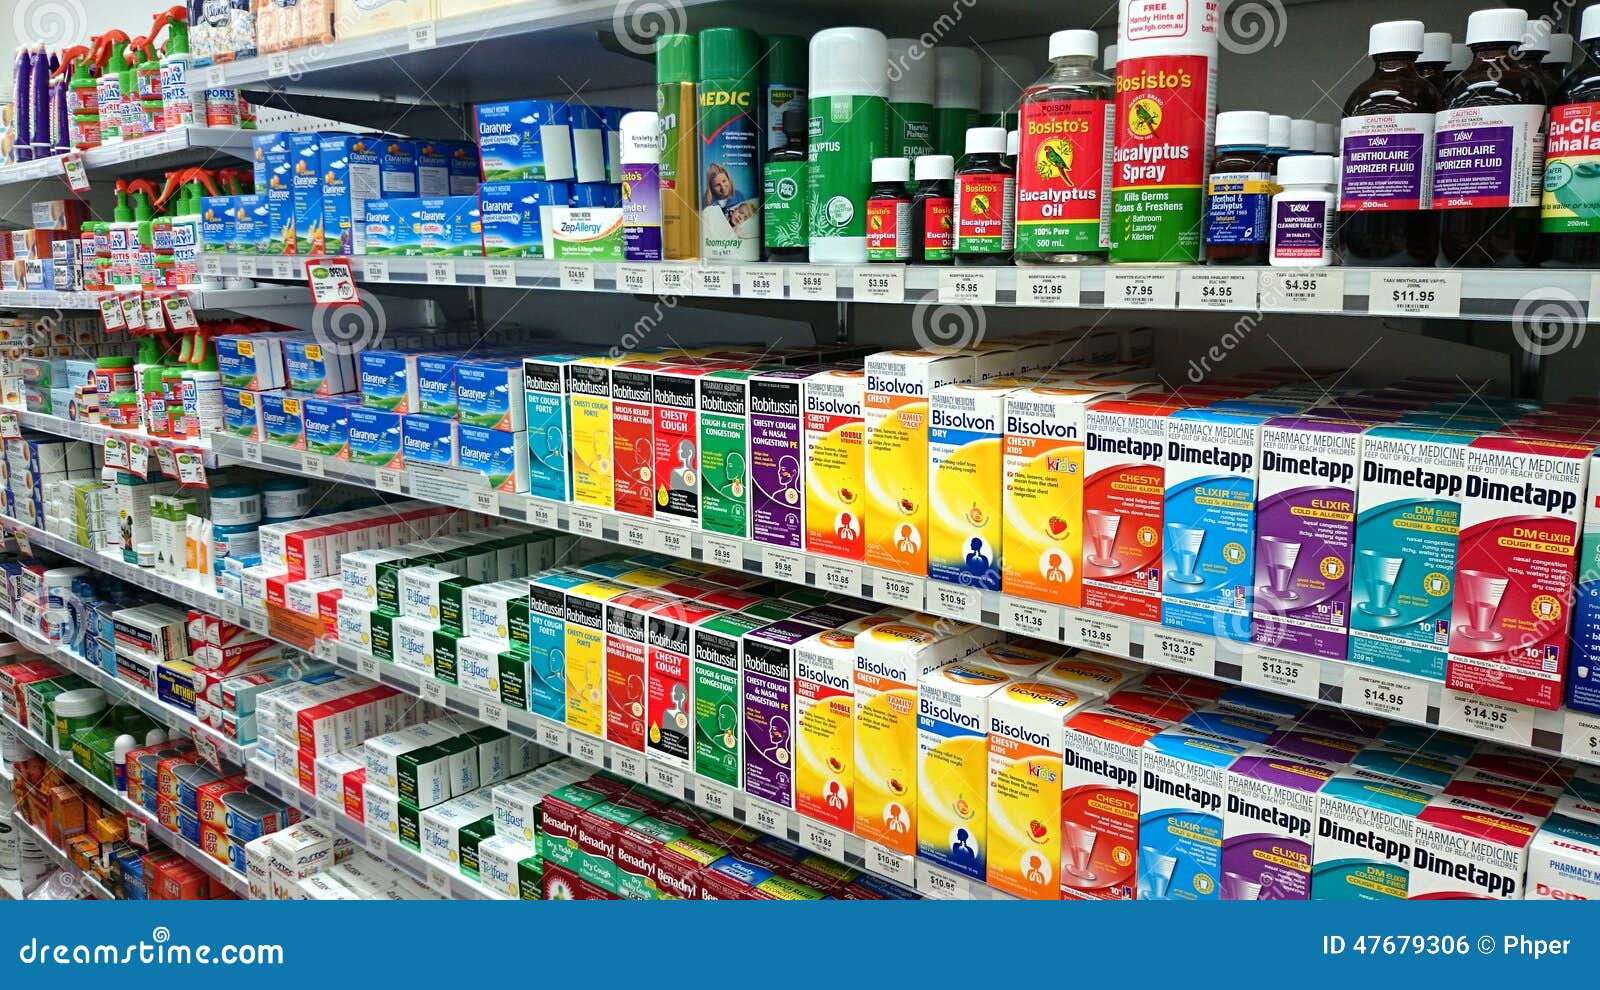 Shelves of pharmaceutical products are displayed in a pharmacy drug 